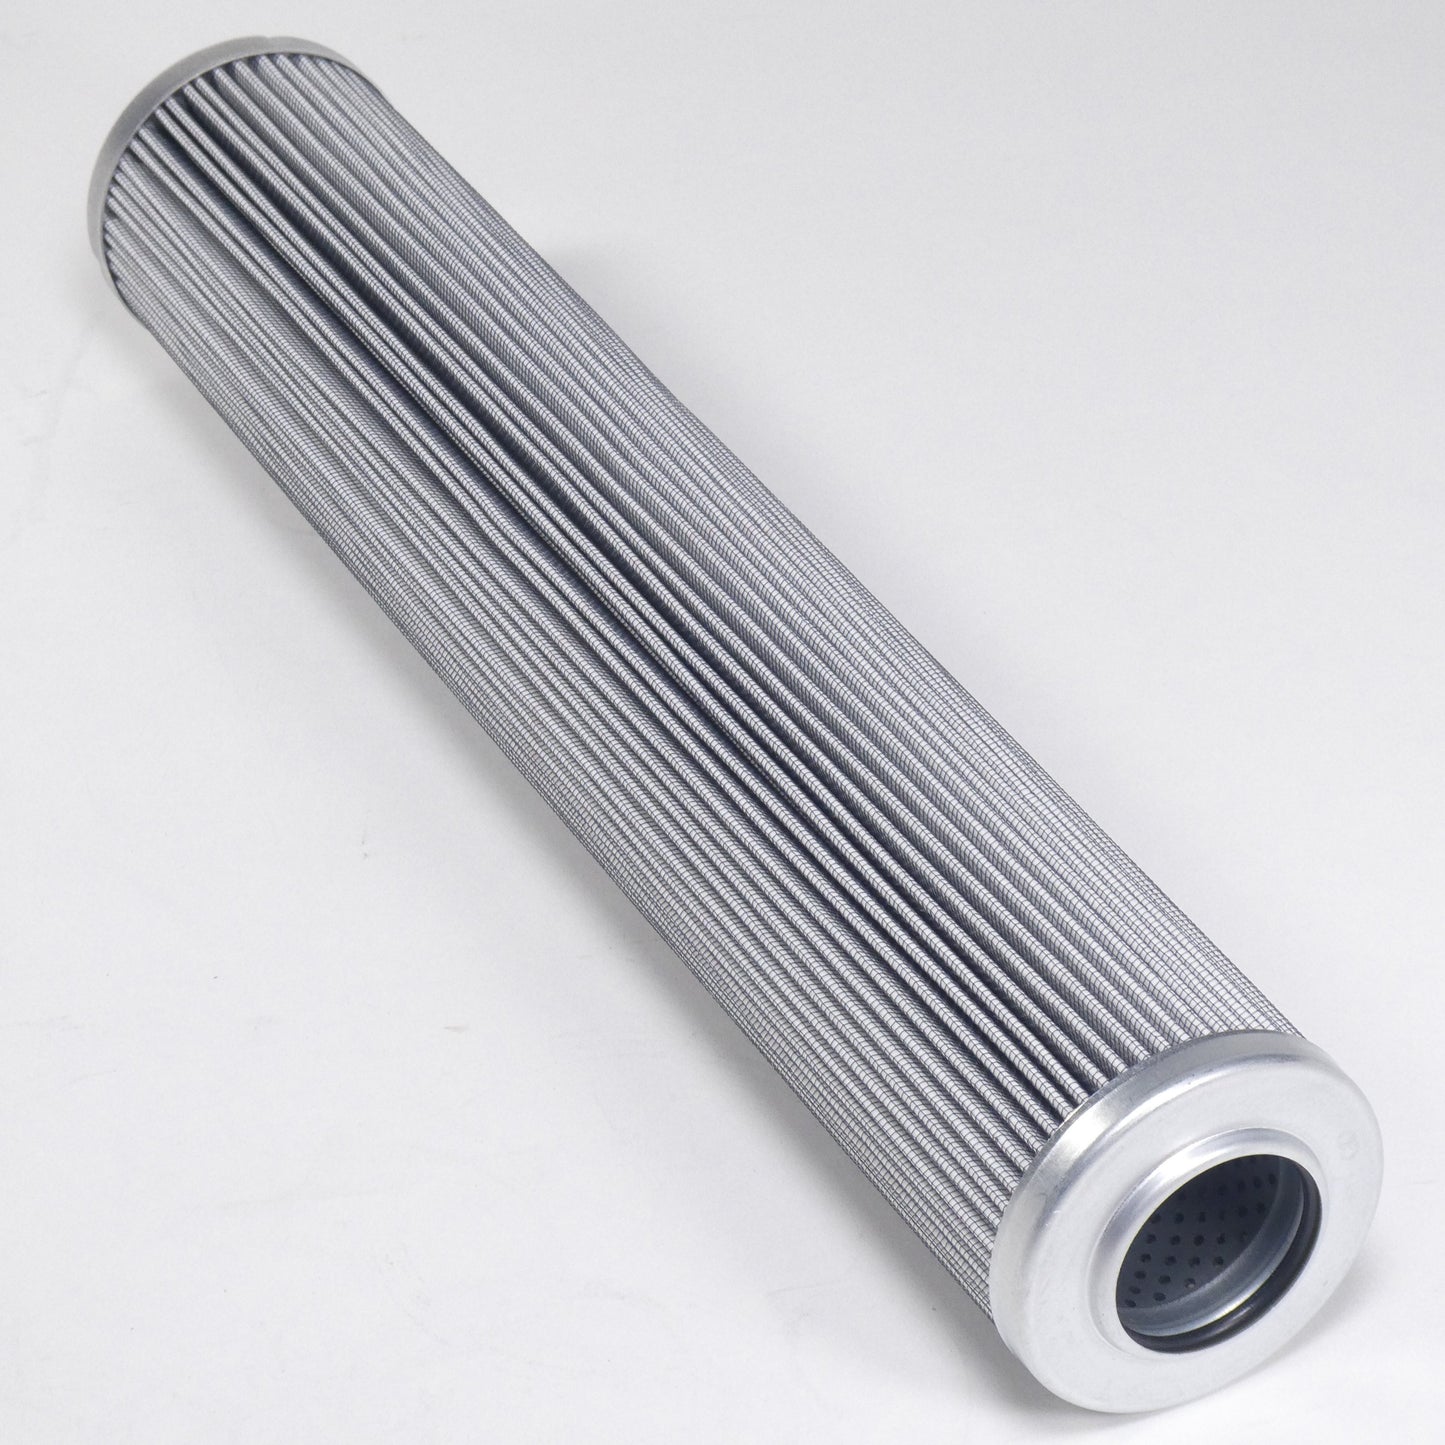 Hydrafil Replacement Filter Element for Western 551709